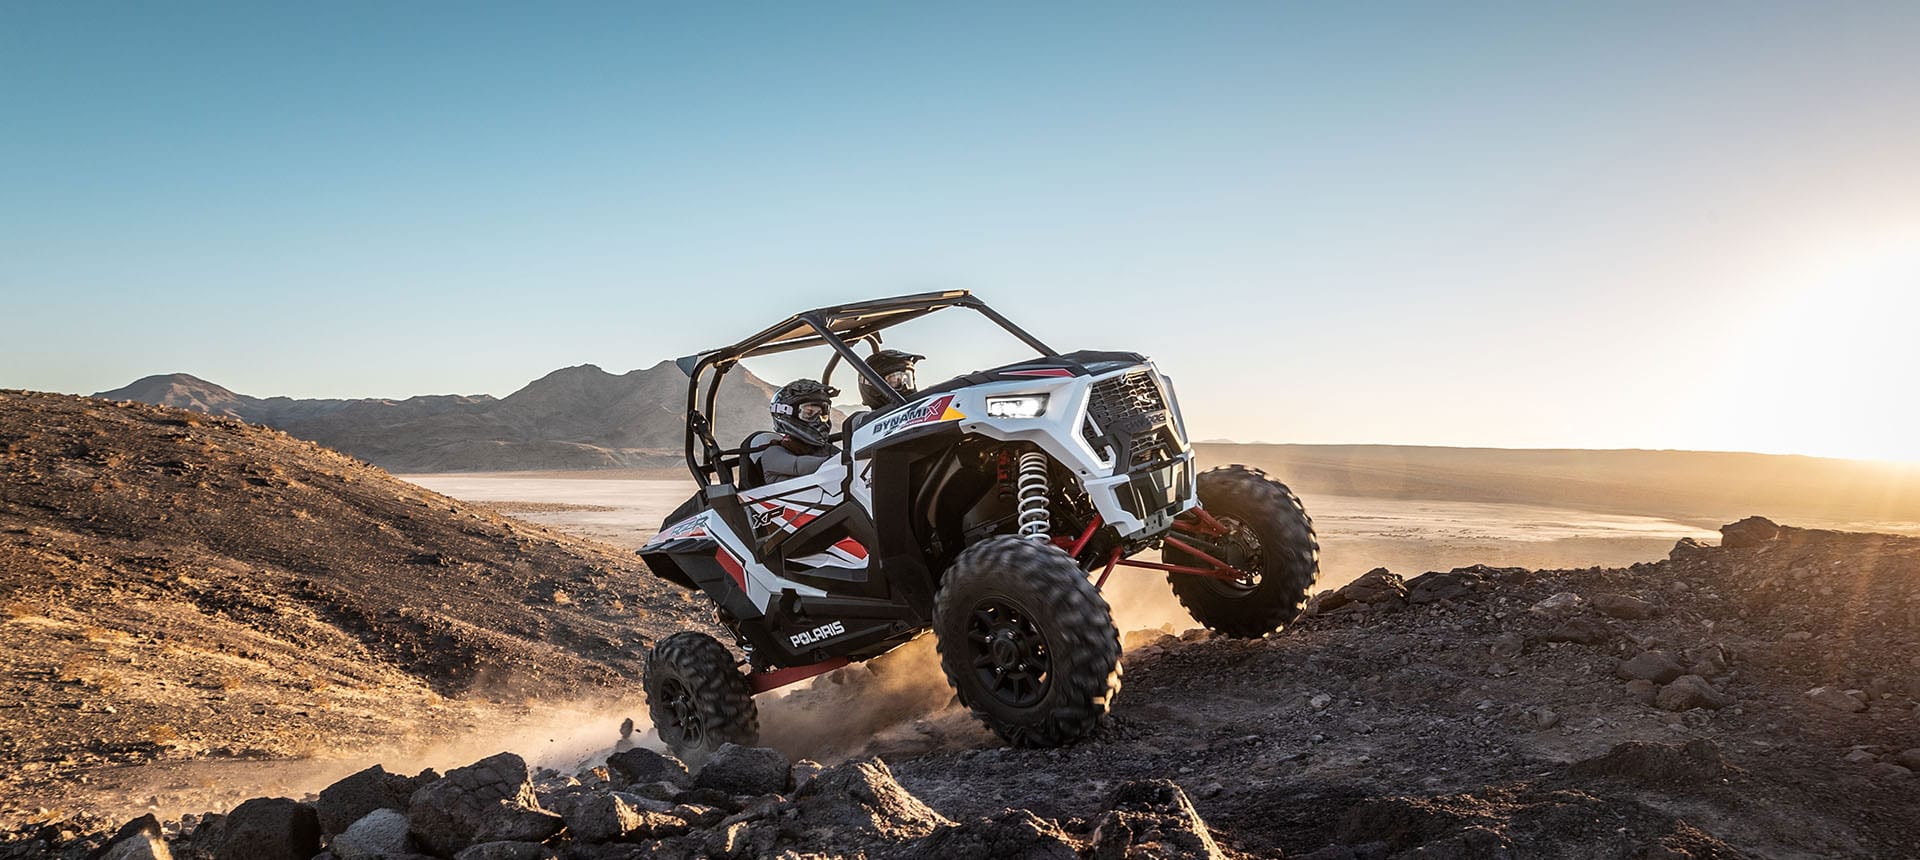 RZR XP 1000 EXTREME OFFROAD VEHICLE